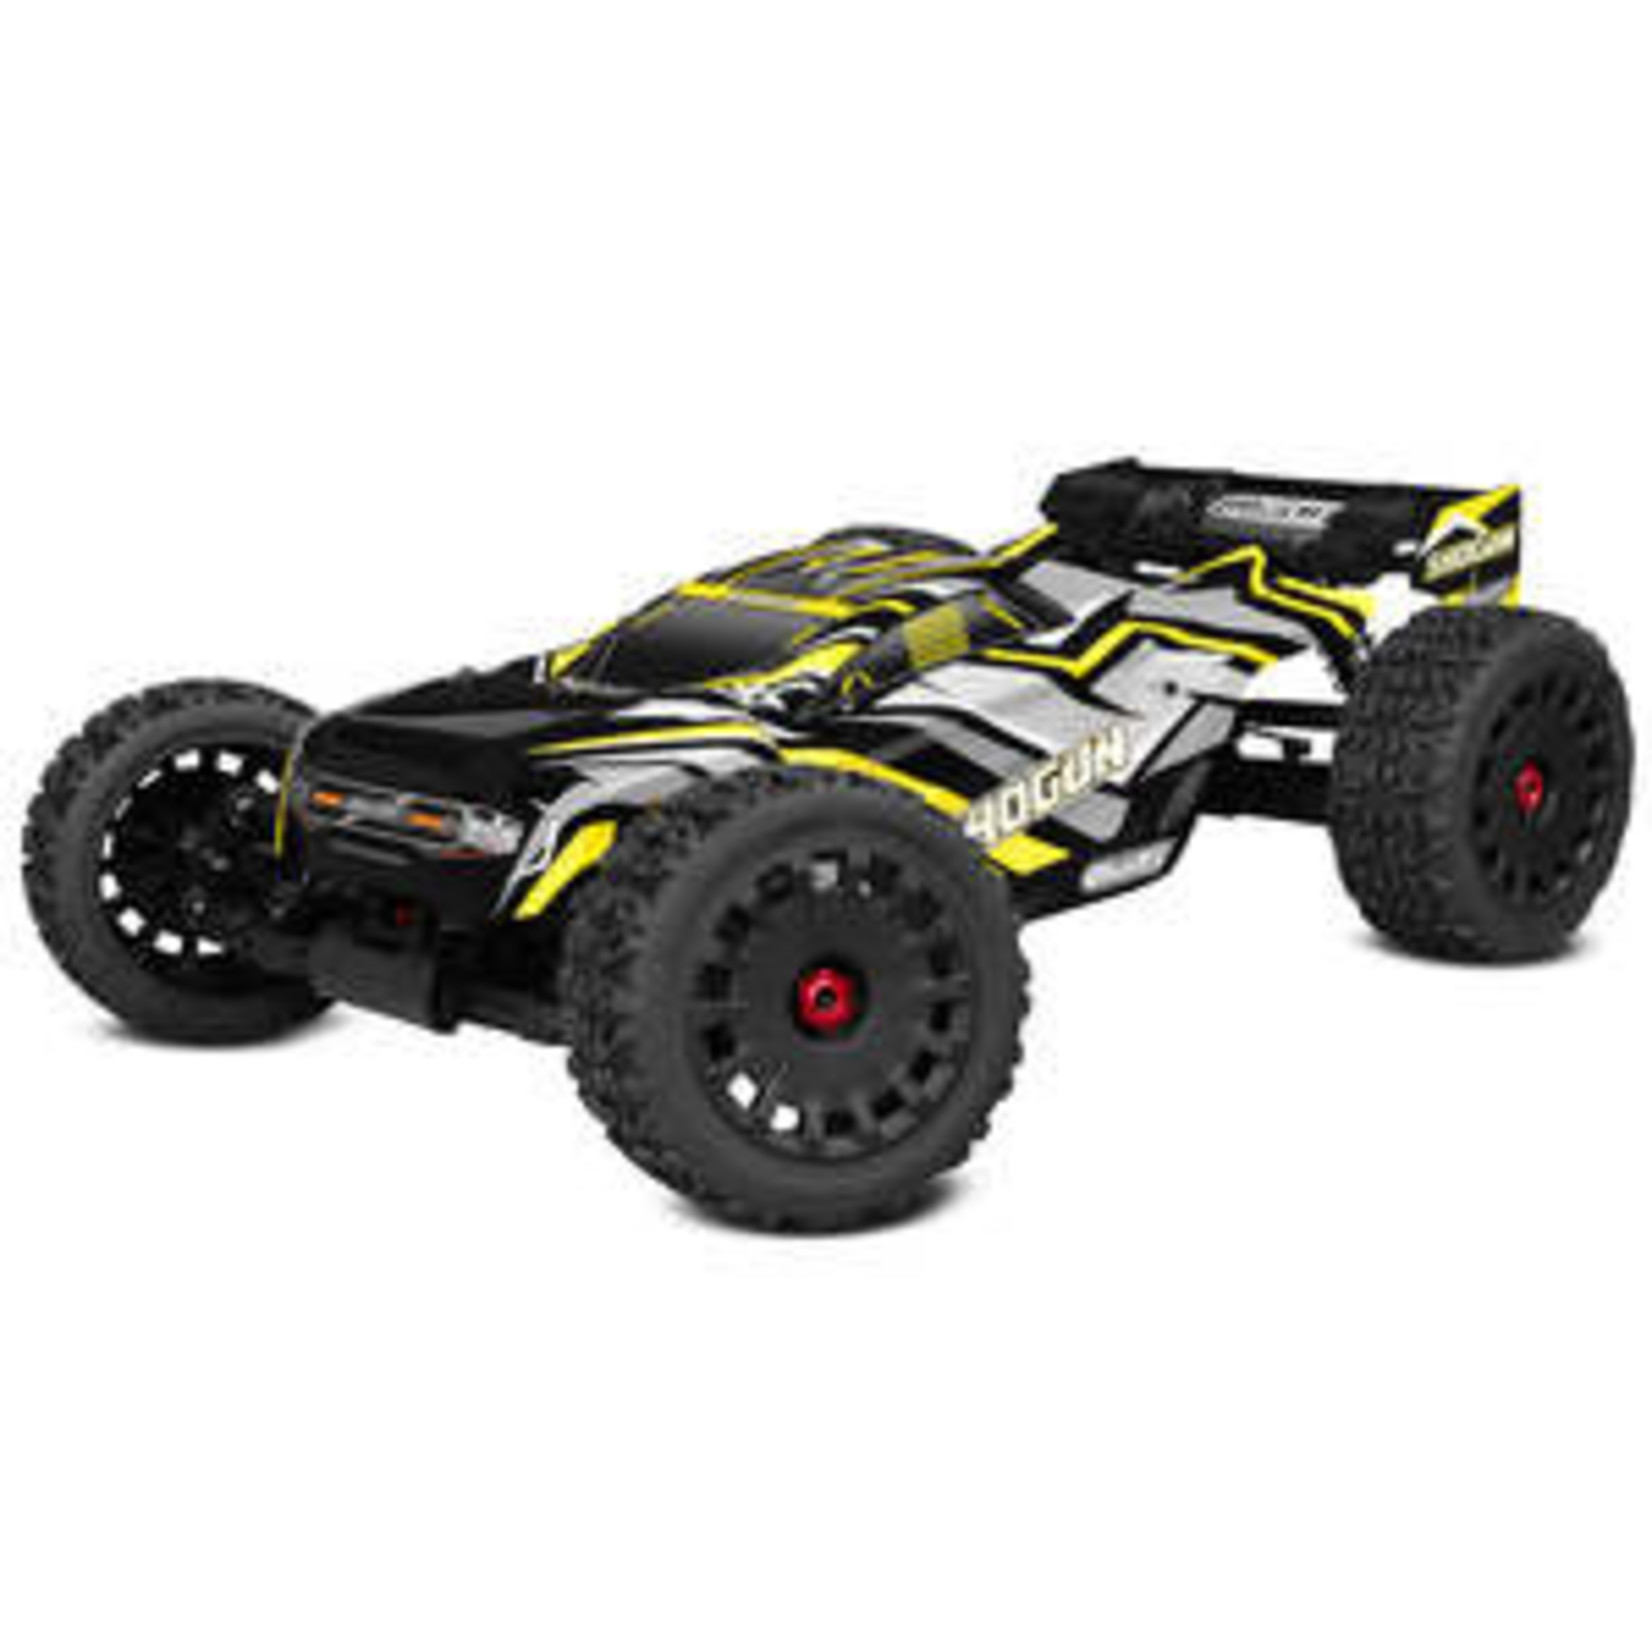 Corally (Team Corally) C-00177  1/8 Shogun XP 4WD Truggy 6S Brushless RTR (No Battery or Charger)